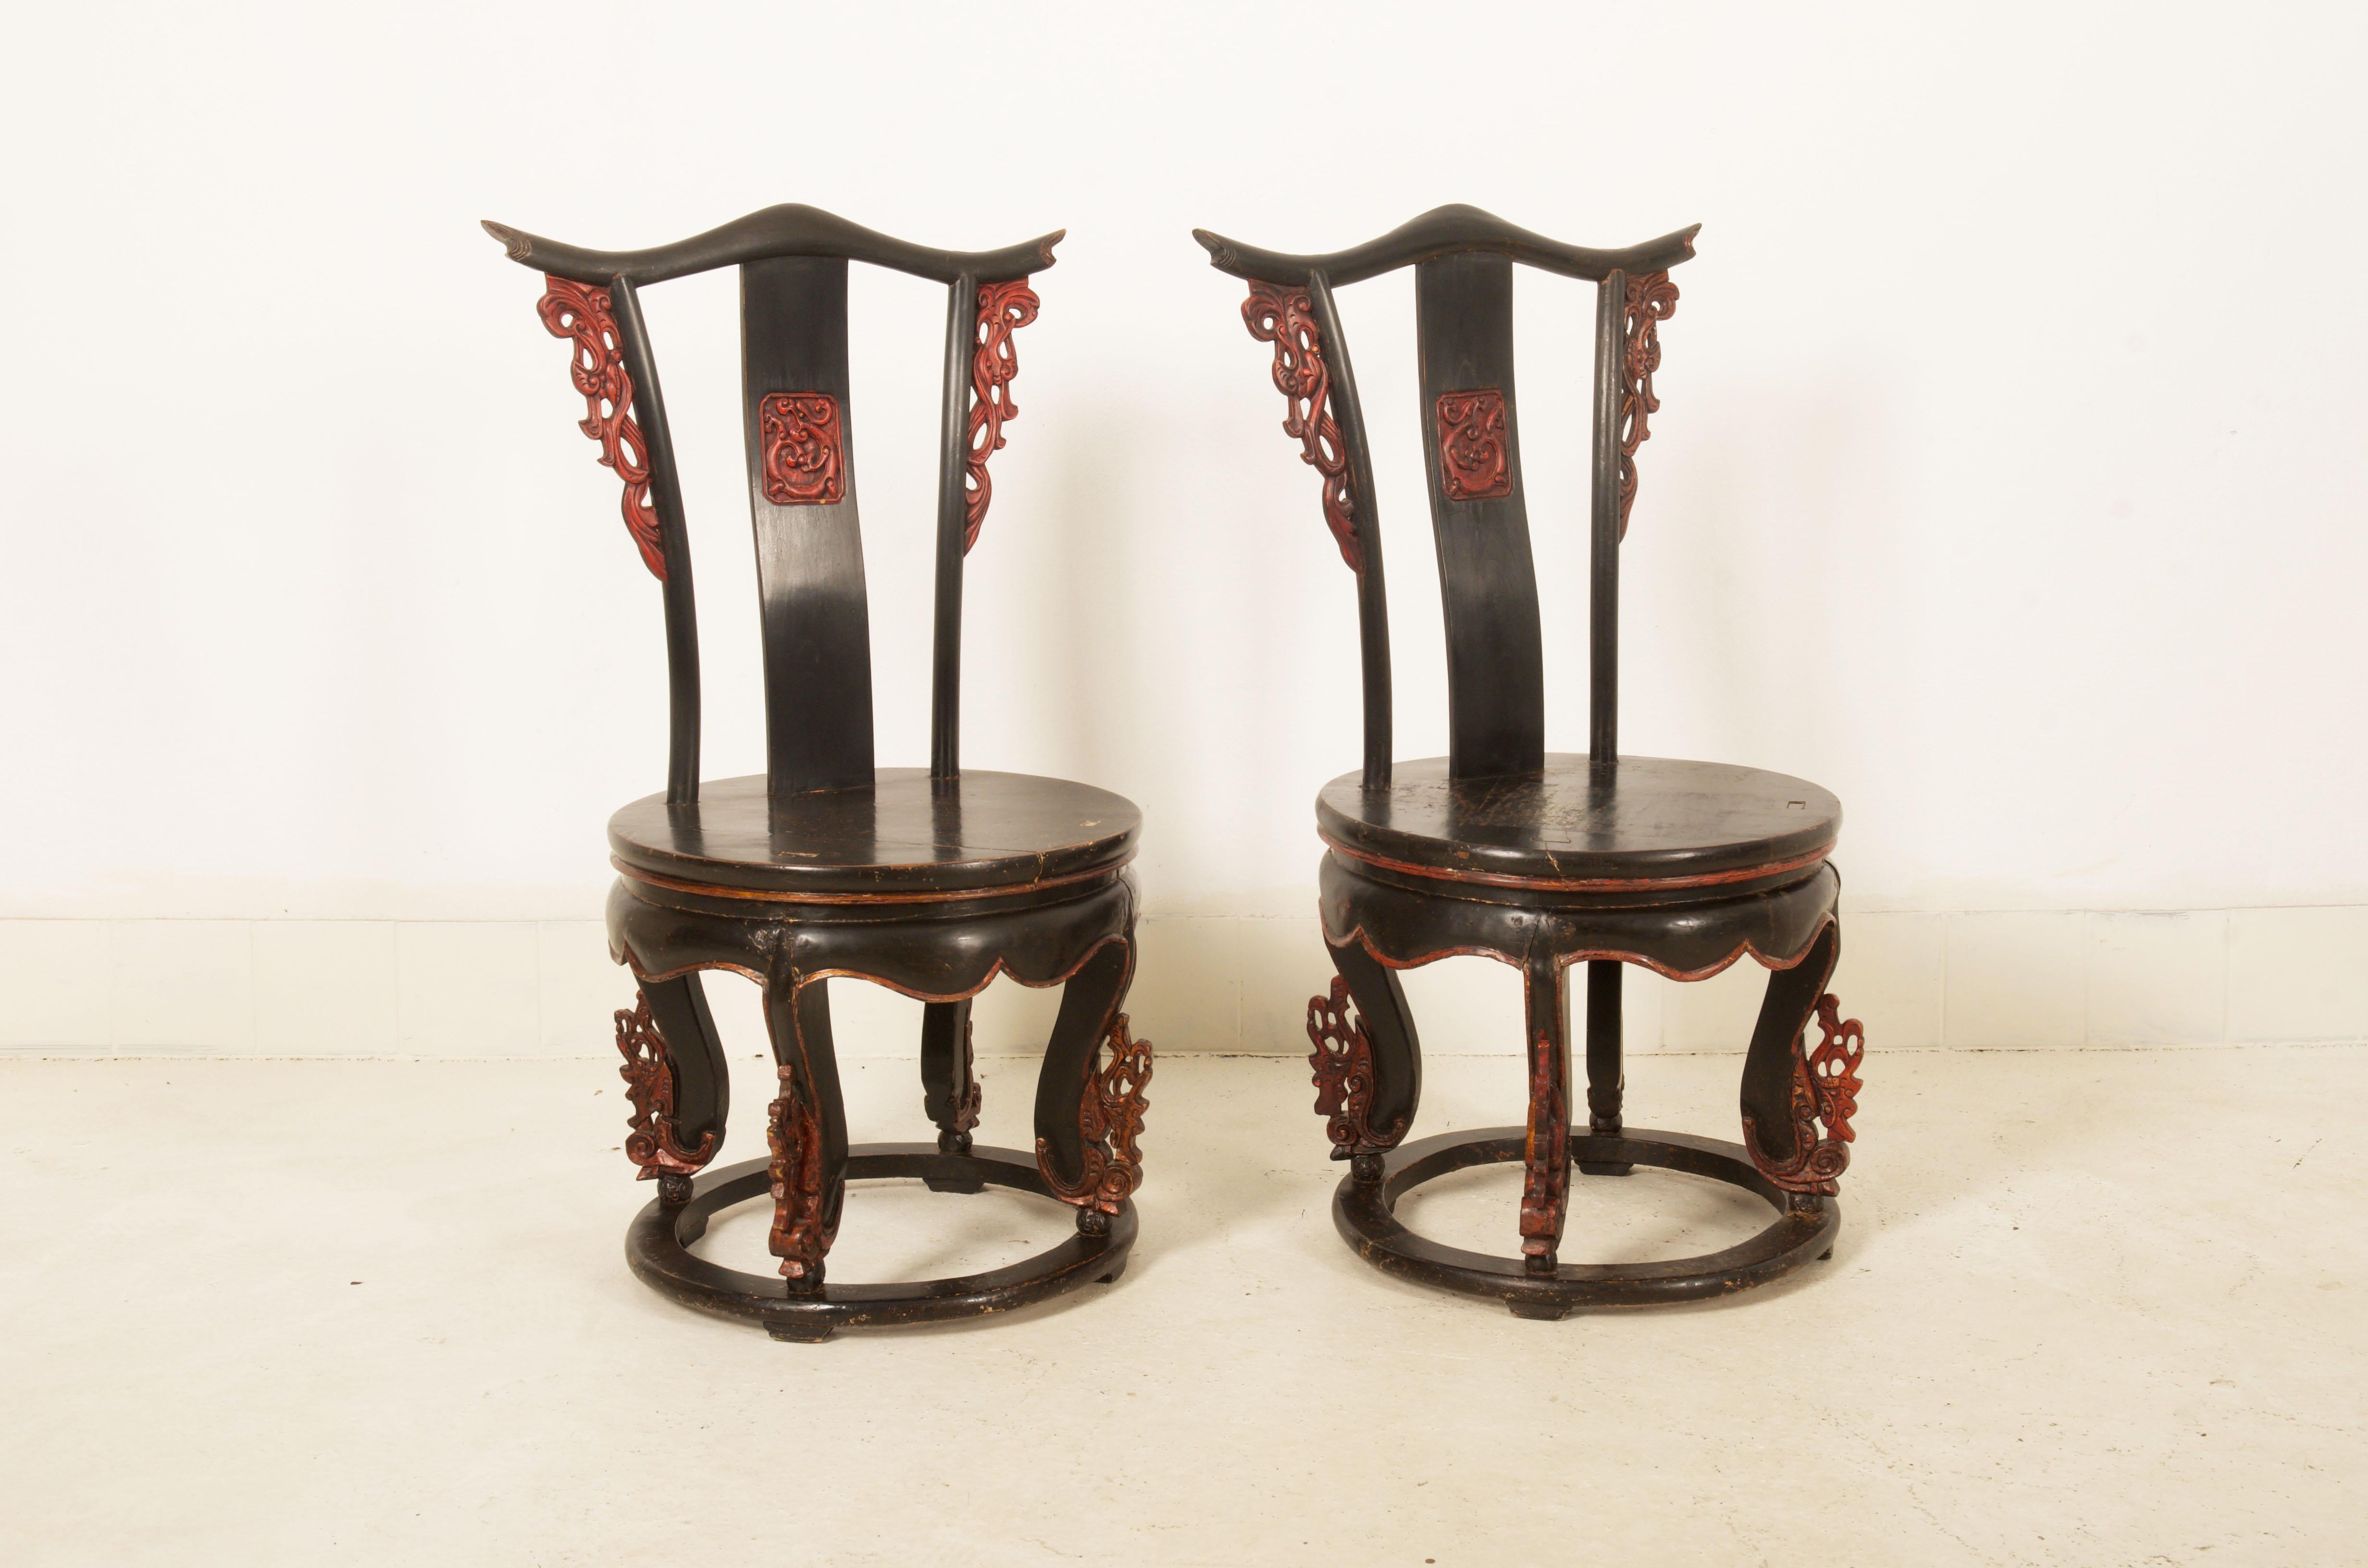 Hardwood frame black and red painted with some ornaments on the backrest and the legs. Made in China in the middle of the 19th century. Price for both.